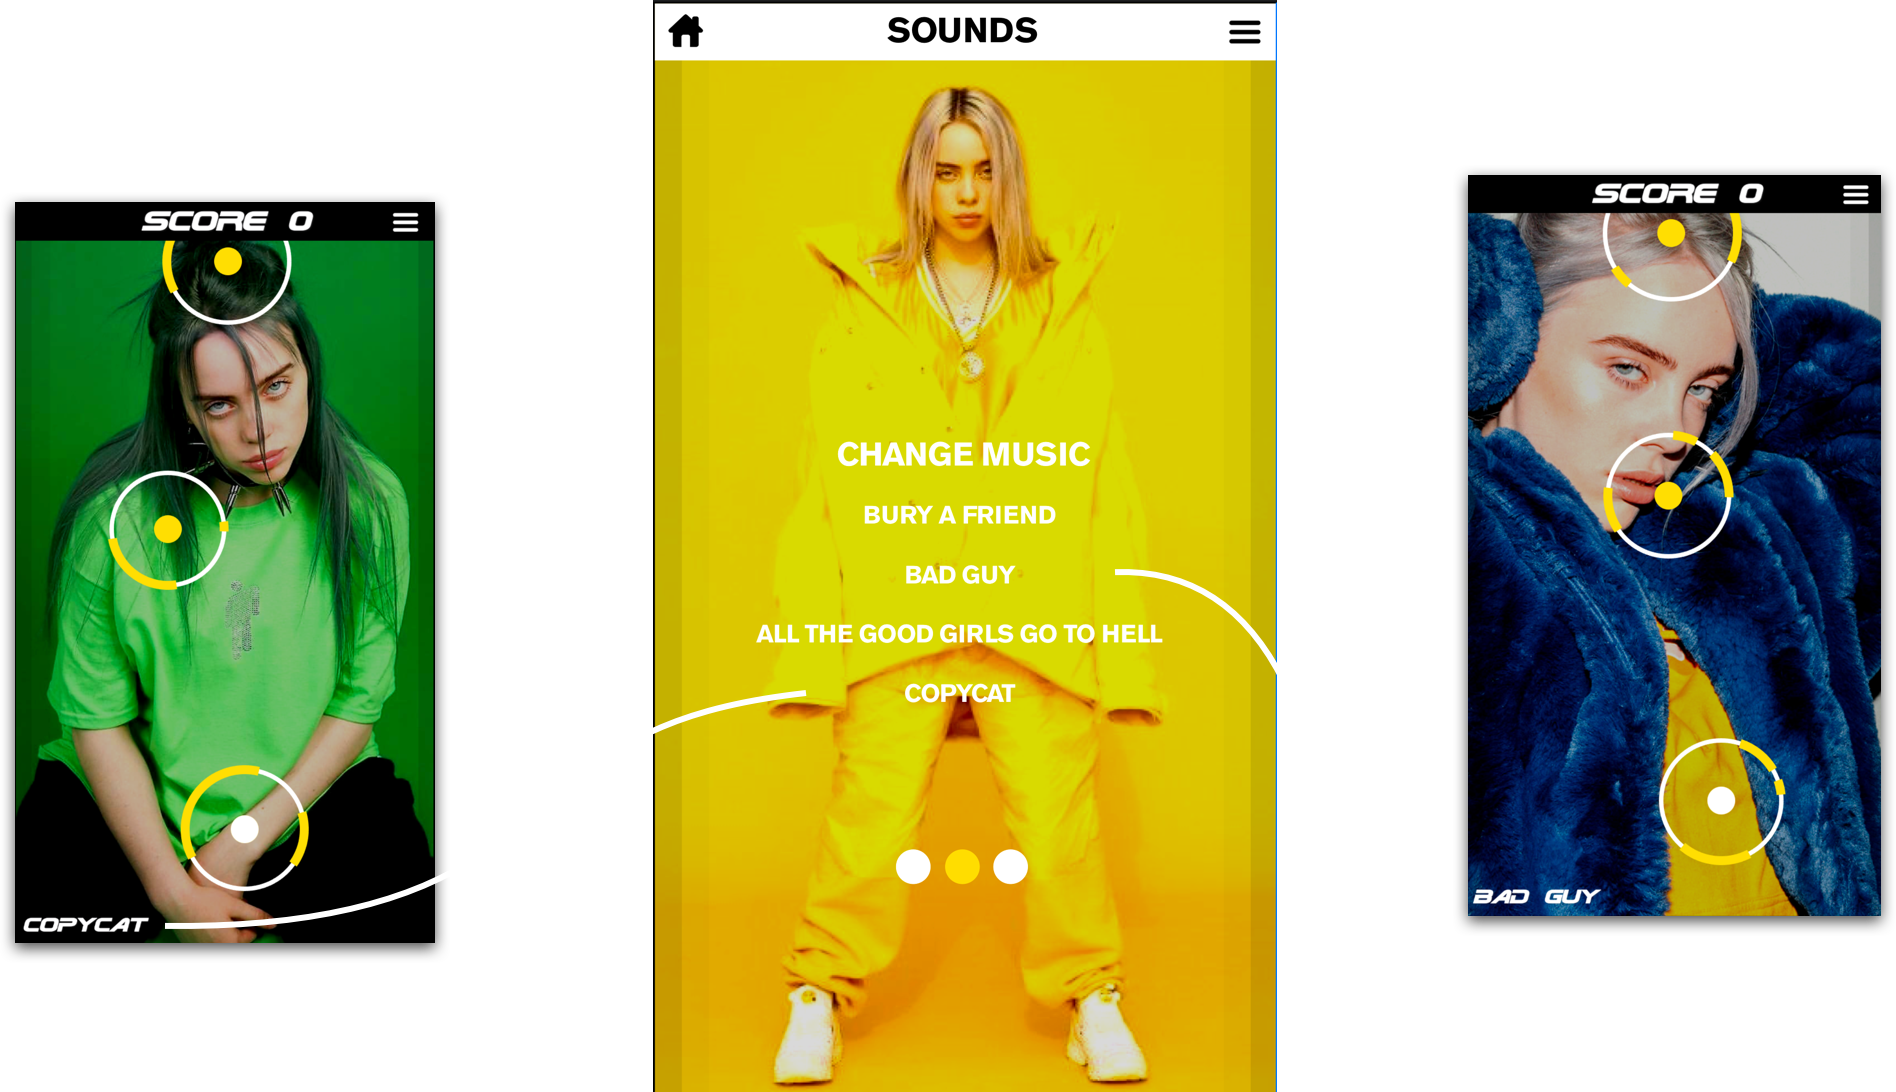 Paul Yanez Billie Eilish Color Shoot Game developed by Father and Daughter